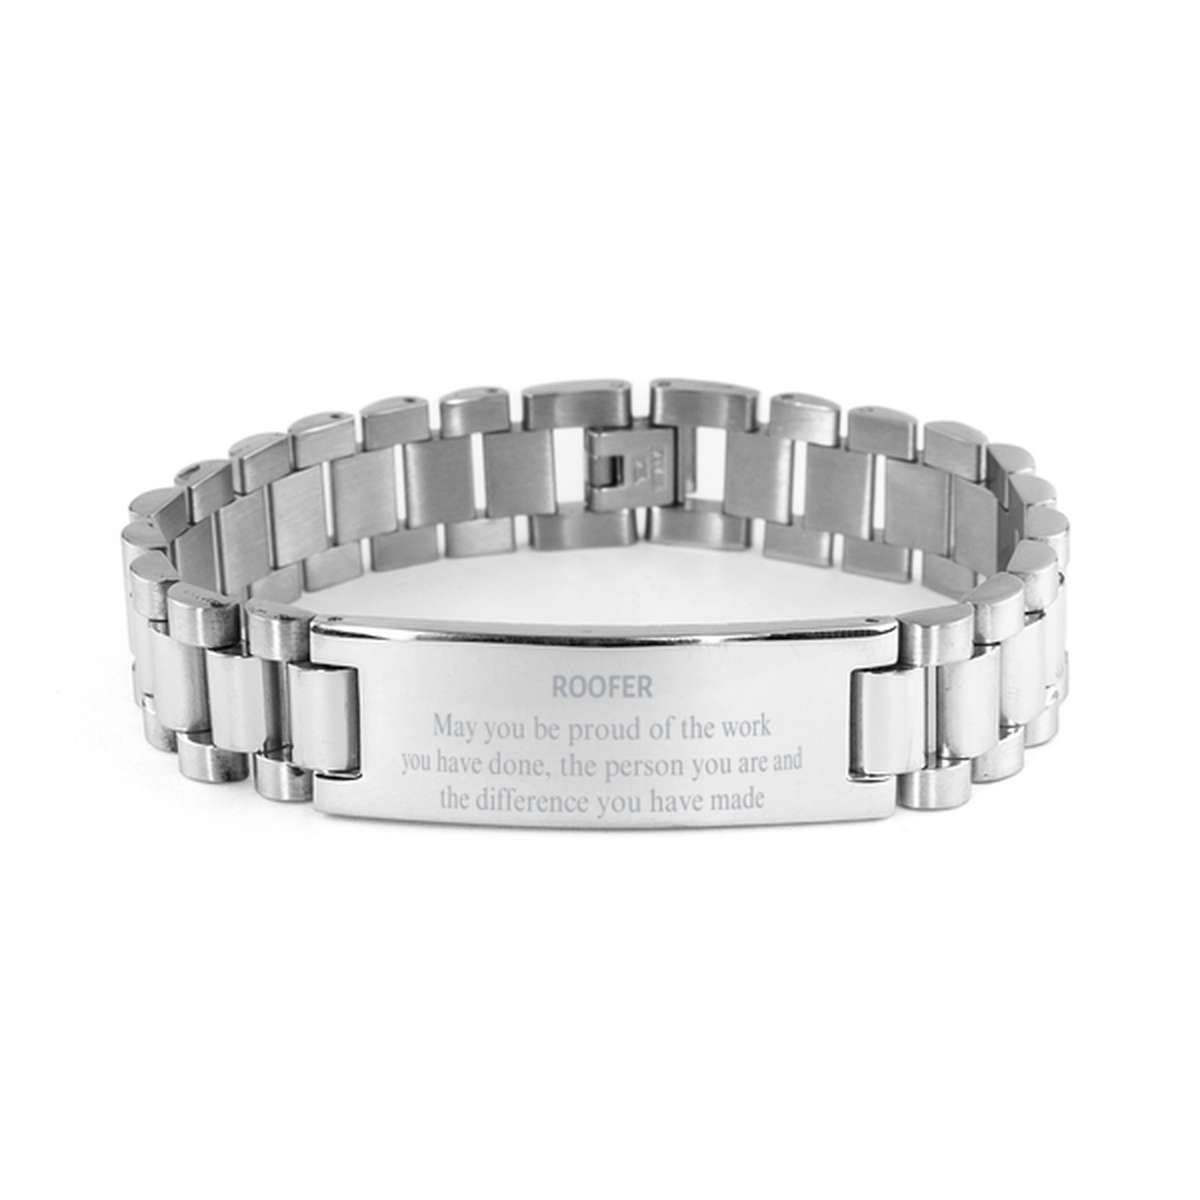 Roofer May you be proud of the work you have done, Retirement Roofer Ladder Stainless Steel Bracelet for Colleague Appreciation Gifts Amazing for Roofer